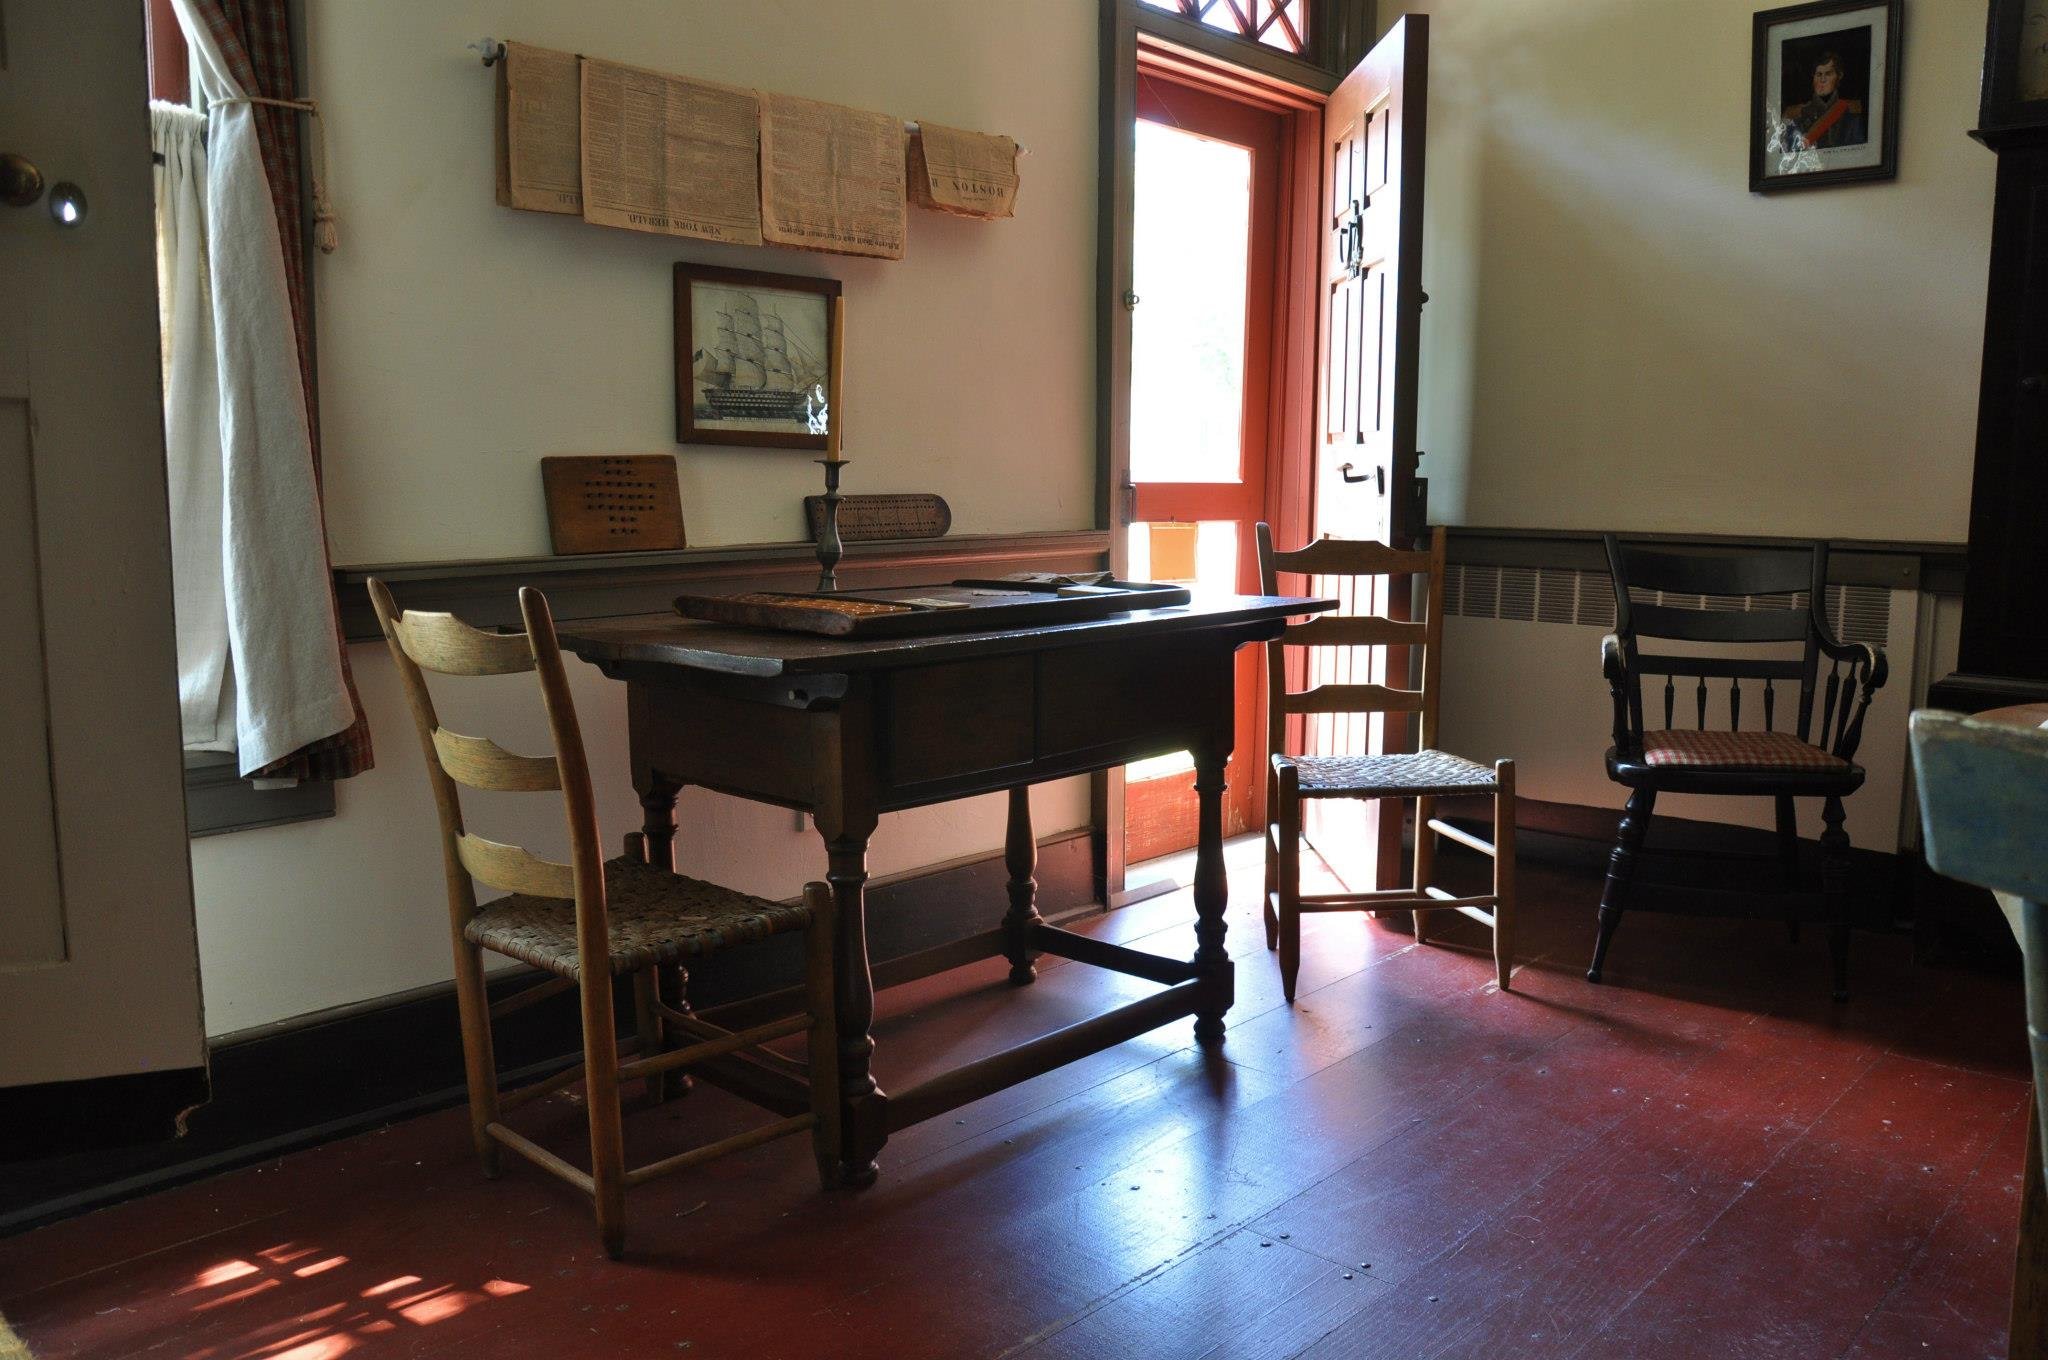 The Museum Today — Overfield Tavern Museum